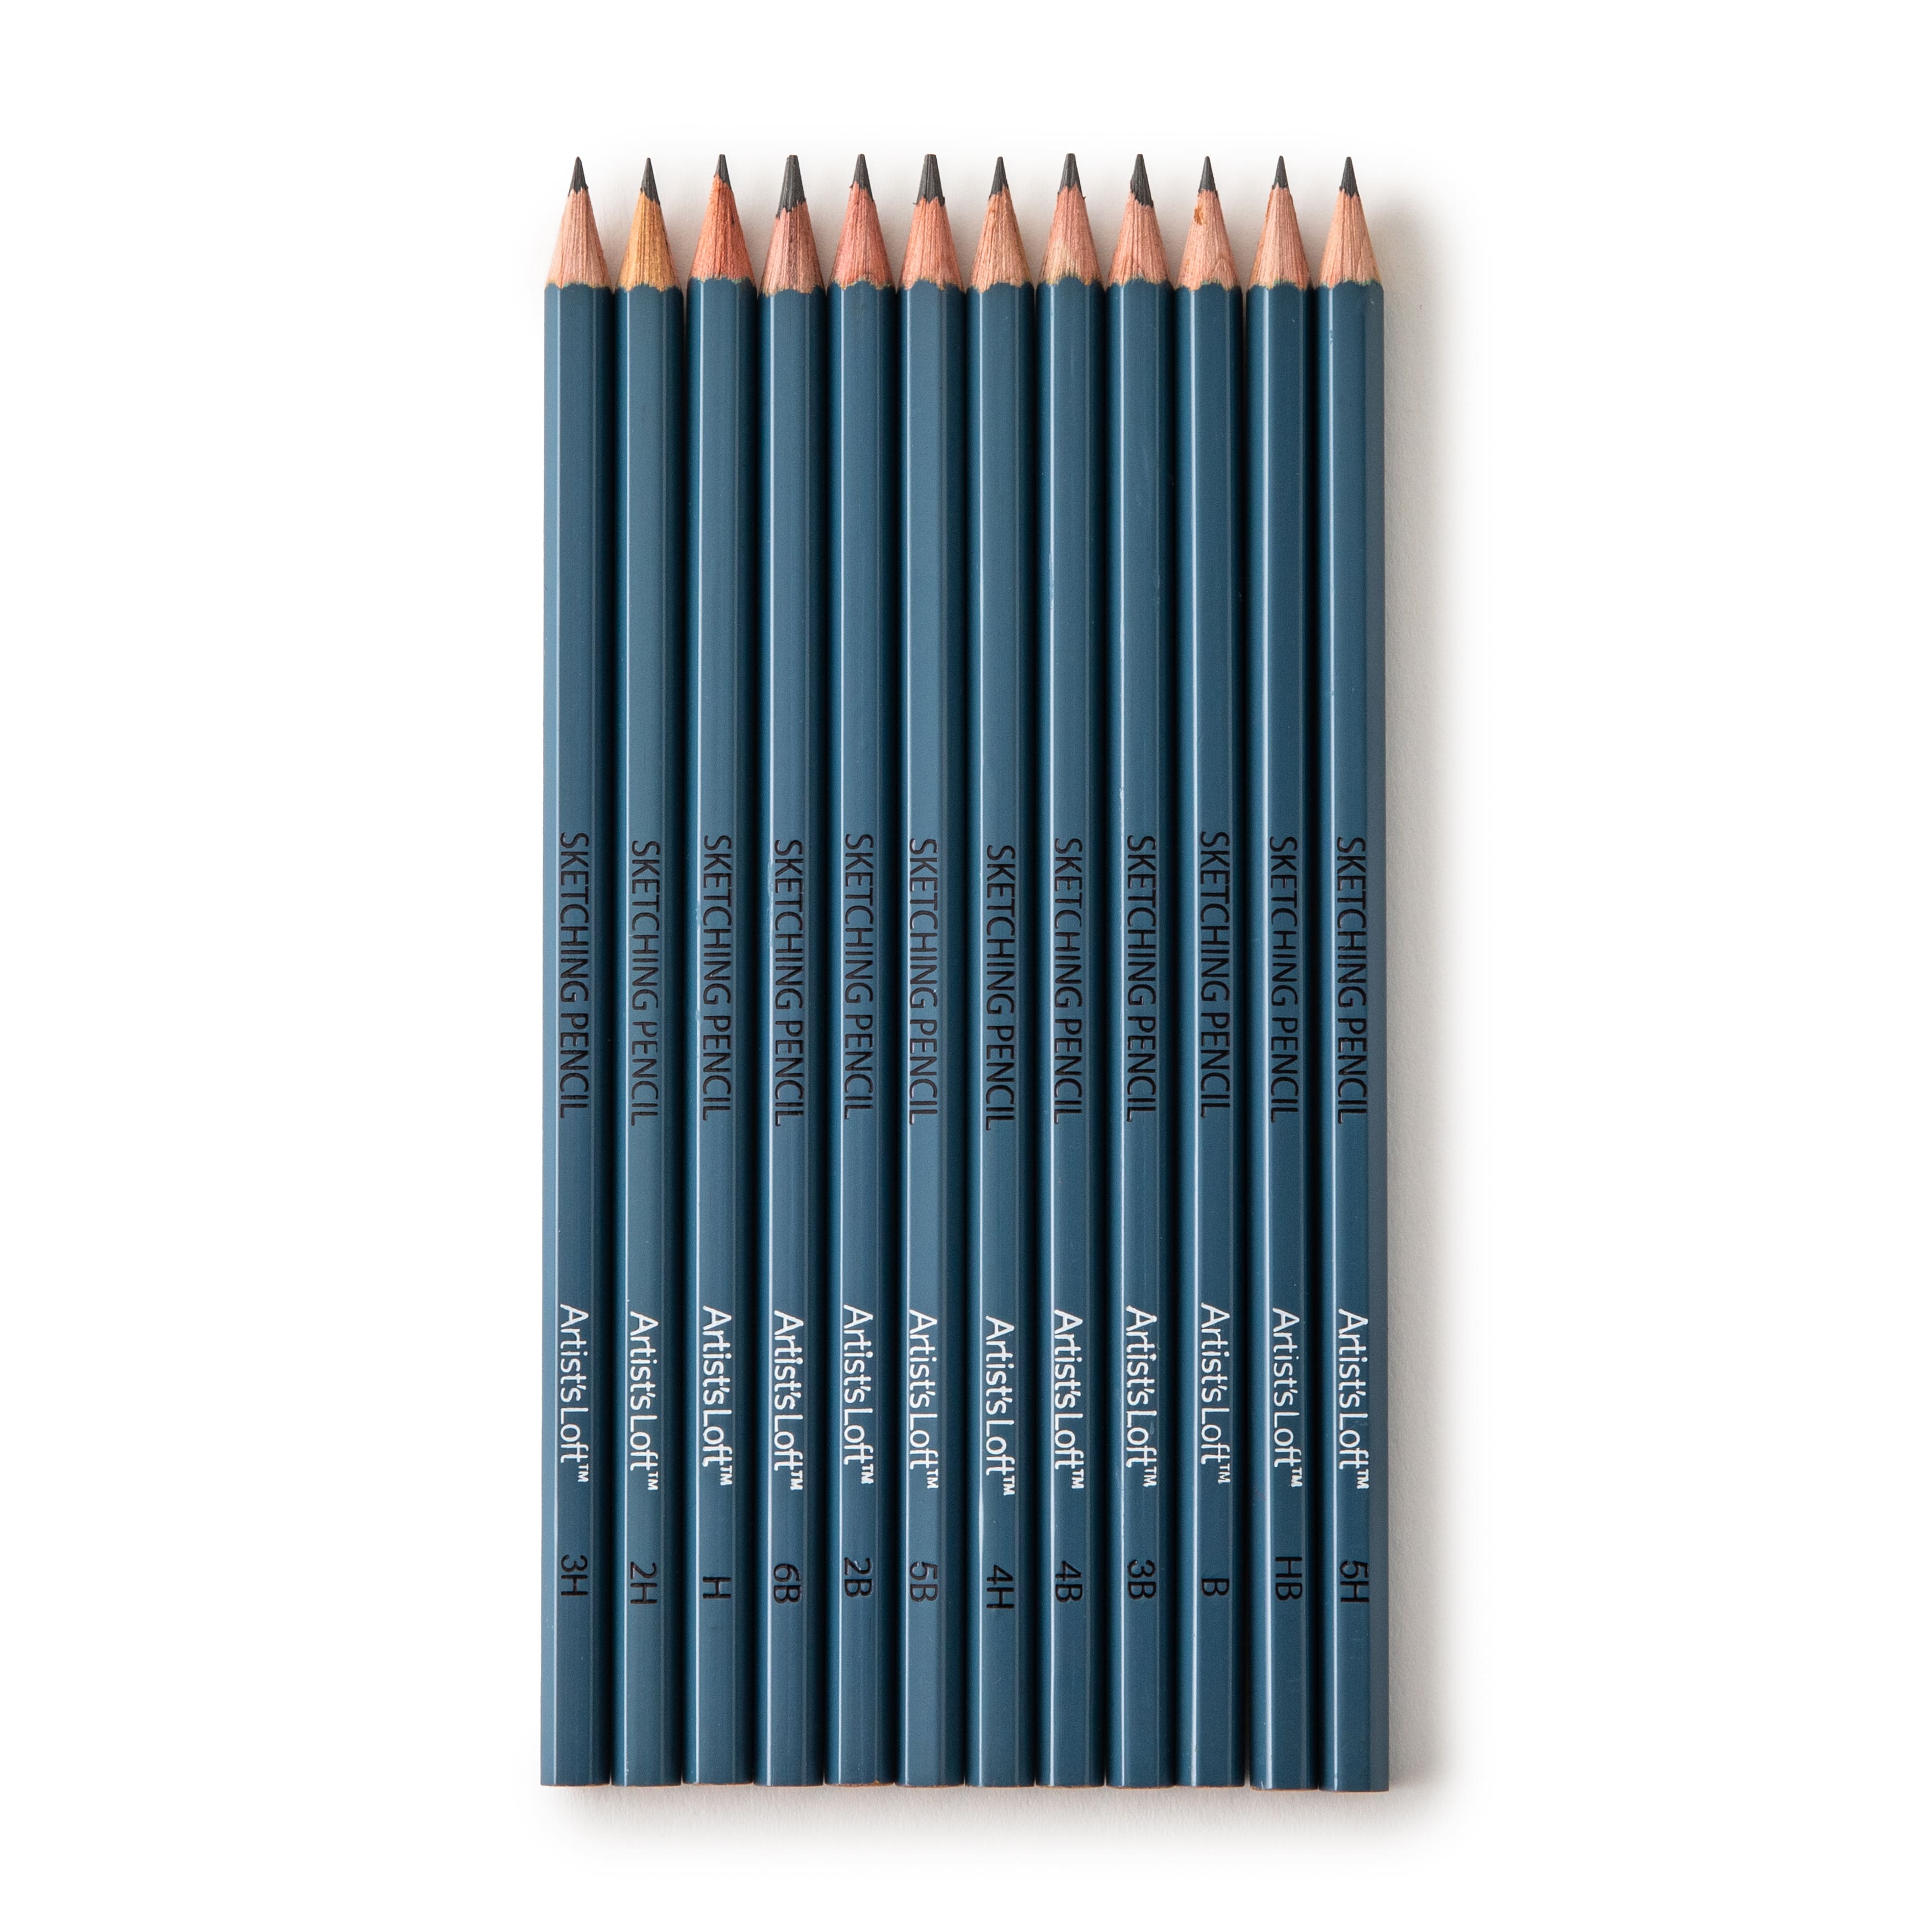 Amazon.com : MARKART Professional White Charcoal Pencils Set, 5 Pieces  White Sketch Pencils White Chalk Pencils for Drawing, Sketching, Shading,  Blending : Arts, Crafts & Sewing